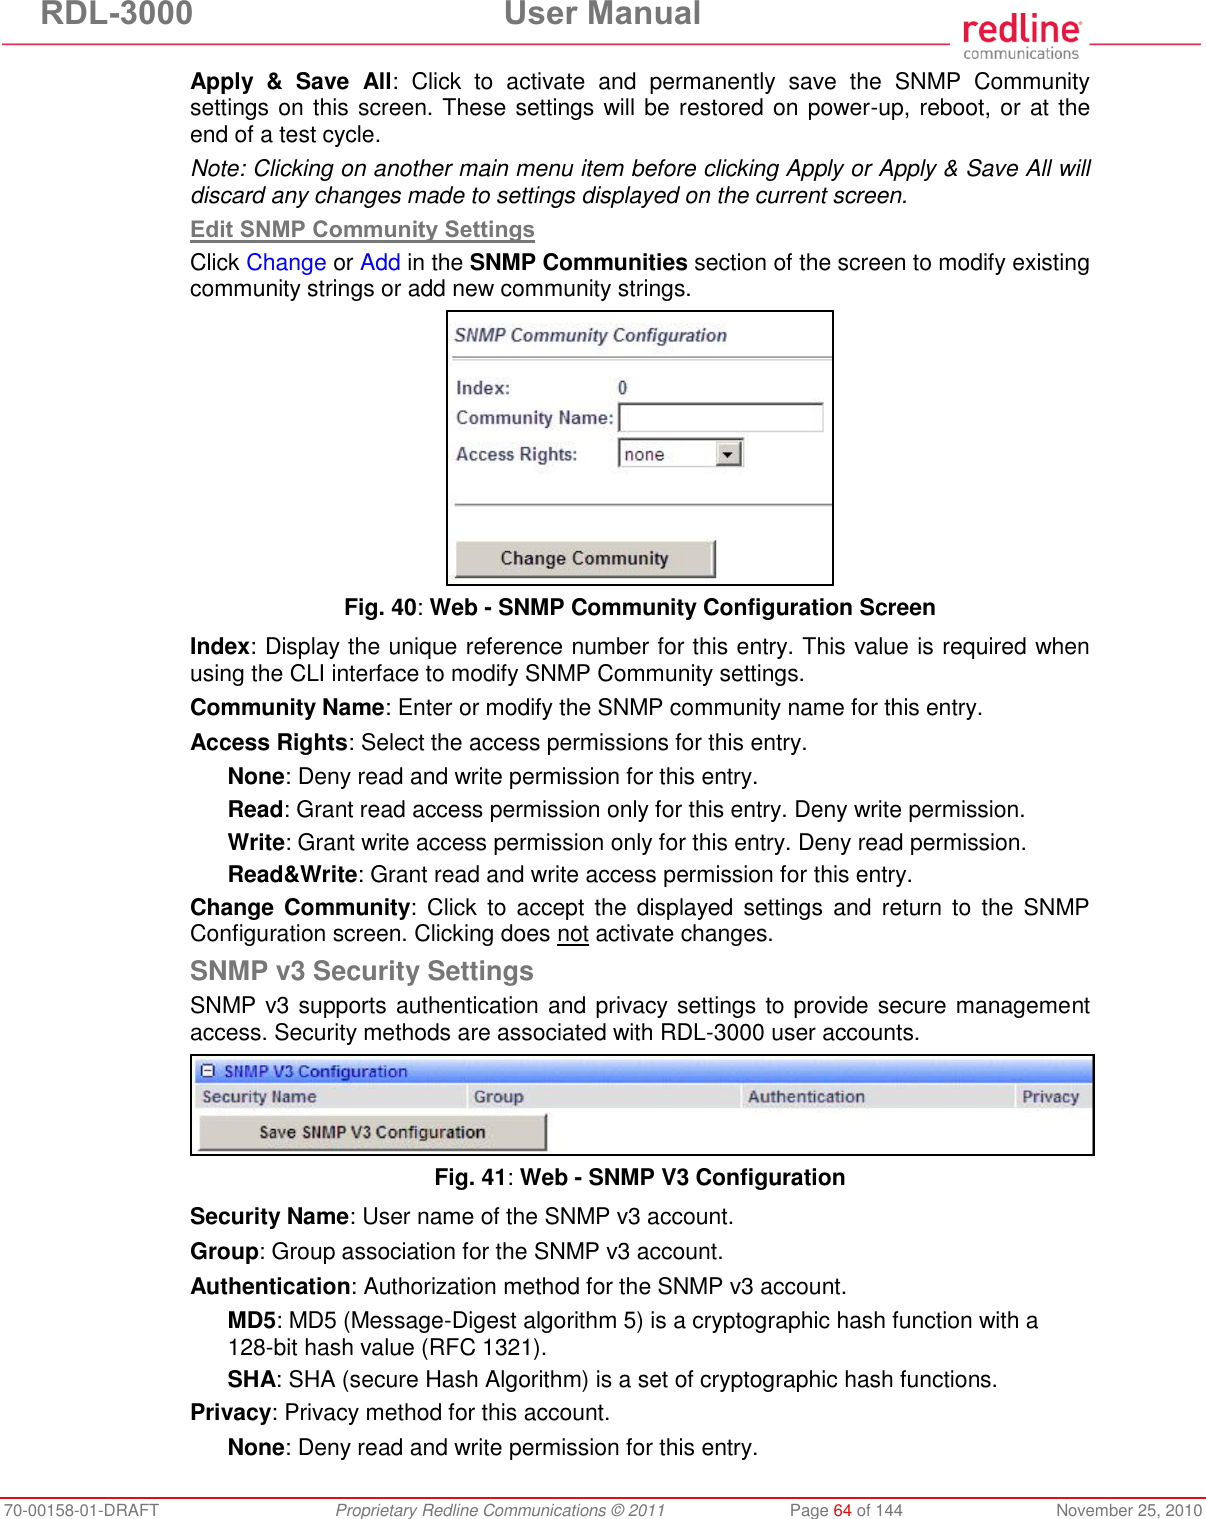 RDL-3000  User Manual 70-00158-01-DRAFT  Proprietary Redline Communications © 2011  Page 64 of 144  November 25, 2010 Apply  &amp;  Save  All:  Click  to  activate  and  permanently  save  the  SNMP  Community settings on this screen. These settings will be restored on power-up, reboot, or at the end of a test cycle. Note: Clicking on another main menu item before clicking Apply or Apply &amp; Save All will discard any changes made to settings displayed on the current screen. Edit SNMP Community Settings Click Change or Add in the SNMP Communities section of the screen to modify existing community strings or add new community strings.  Fig. 40: Web - SNMP Community Configuration Screen Index: Display the unique reference number for this entry. This value is required when using the CLI interface to modify SNMP Community settings. Community Name: Enter or modify the SNMP community name for this entry. Access Rights: Select the access permissions for this entry. None: Deny read and write permission for this entry. Read: Grant read access permission only for this entry. Deny write permission. Write: Grant write access permission only for this entry. Deny read permission. Read&amp;Write: Grant read and write access permission for this entry. Change Community:  Click  to  accept  the  displayed settings  and  return  to  the  SNMP Configuration screen. Clicking does not activate changes. SNMP v3 Security Settings SNMP v3 supports authentication and privacy settings to provide secure management access. Security methods are associated with RDL-3000 user accounts.  Fig. 41: Web - SNMP V3 Configuration Security Name: User name of the SNMP v3 account. Group: Group association for the SNMP v3 account. Authentication: Authorization method for the SNMP v3 account. MD5: MD5 (Message-Digest algorithm 5) is a cryptographic hash function with a 128-bit hash value (RFC 1321). SHA: SHA (secure Hash Algorithm) is a set of cryptographic hash functions. Privacy: Privacy method for this account. None: Deny read and write permission for this entry. 